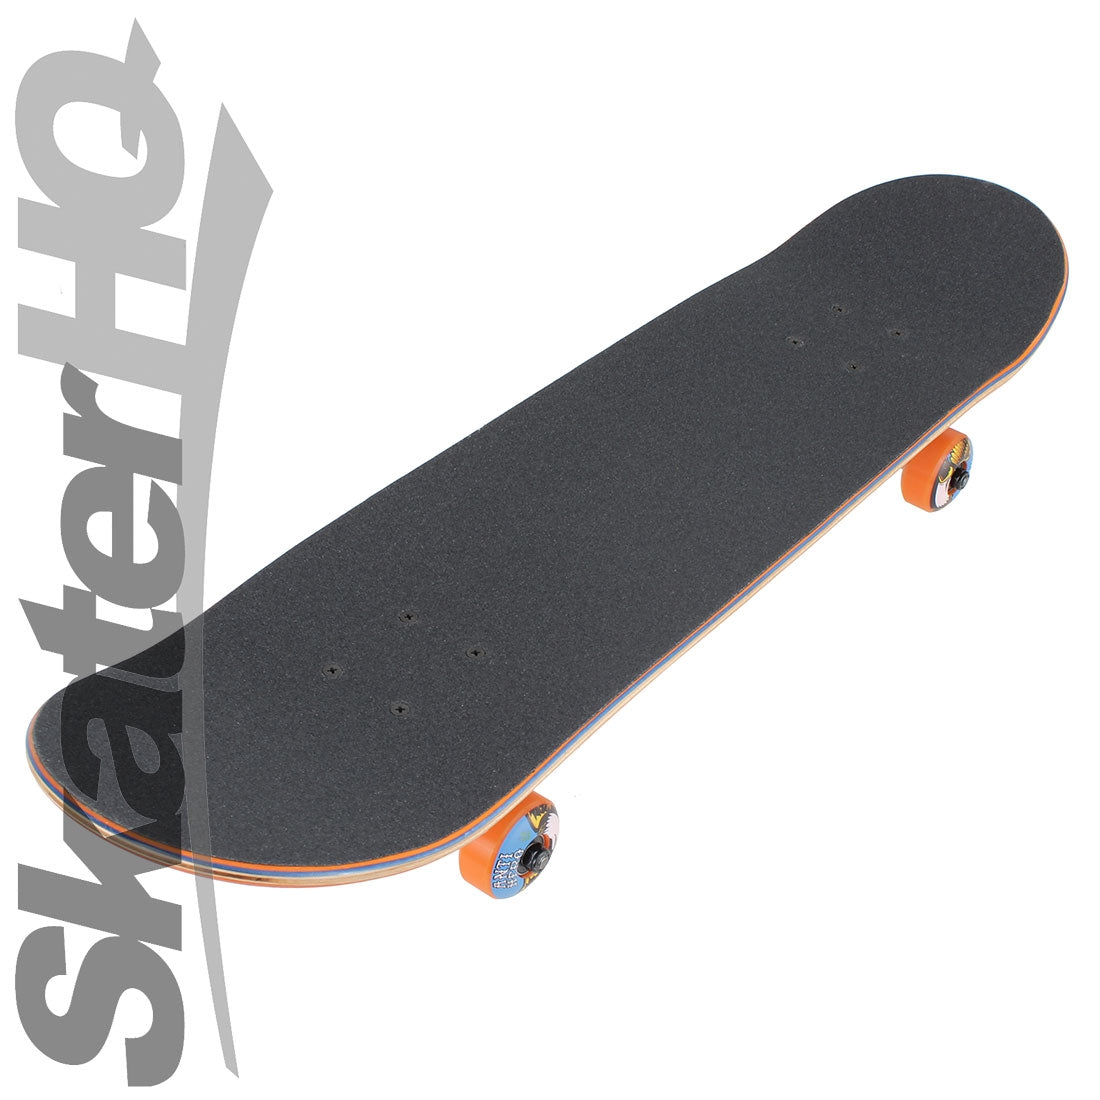 Antihero Eagle Stained 7.5 Complete - Navy Skateboard Completes Modern Street